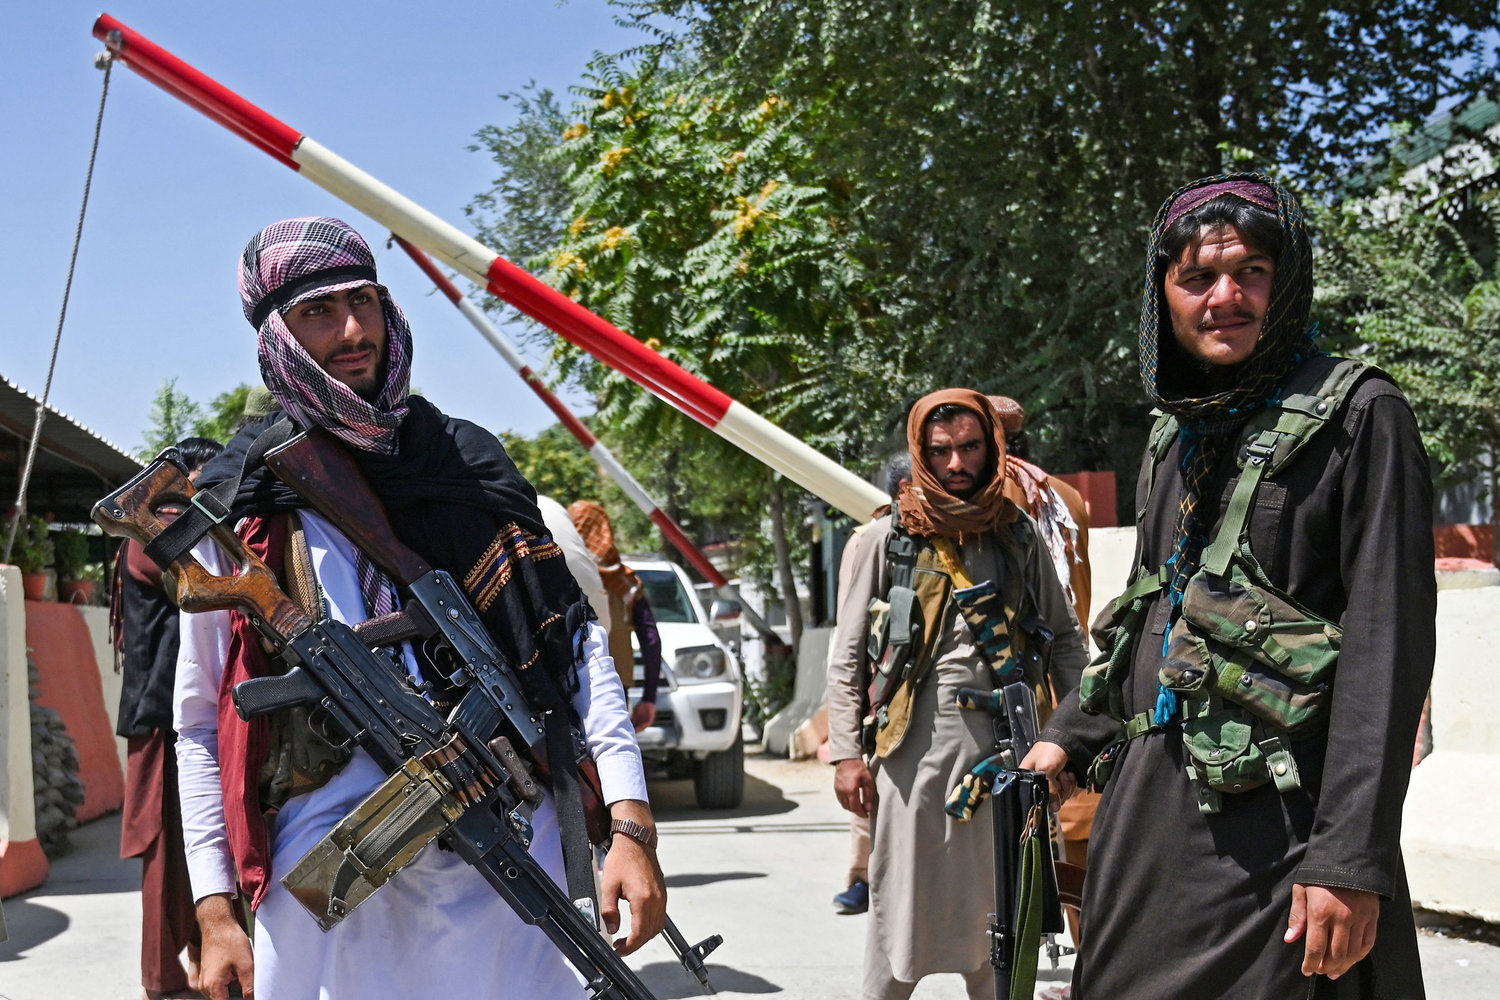 Taliban fighters stand guard along a roadside near the Zanbaq Square in Kabul on August 16, 2021, after a stunningly swift end to Afghanistan's 20-year war, as thousands of people mobbed the city's airport trying to flee the group's feared hardline brand of Islamist rule. (Wakil Kohsar/AFP via Getty Images/TNS)